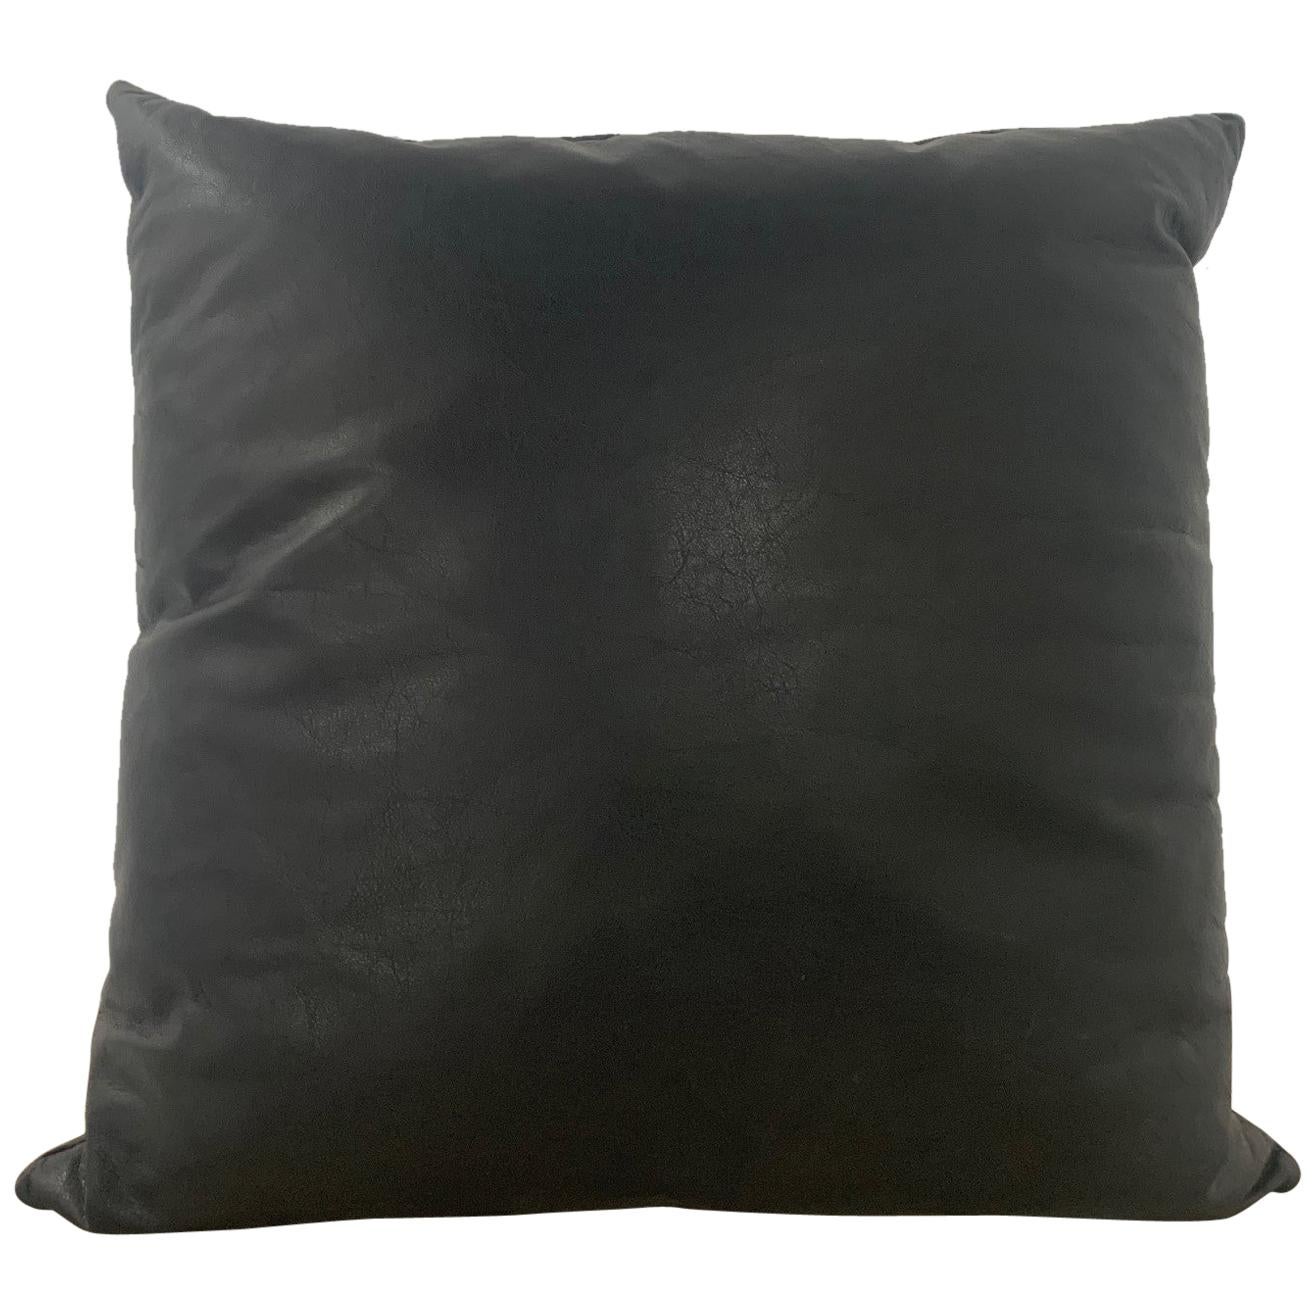 Seven Black Leather Down Pillows by Joe D'Urso for Knoll International